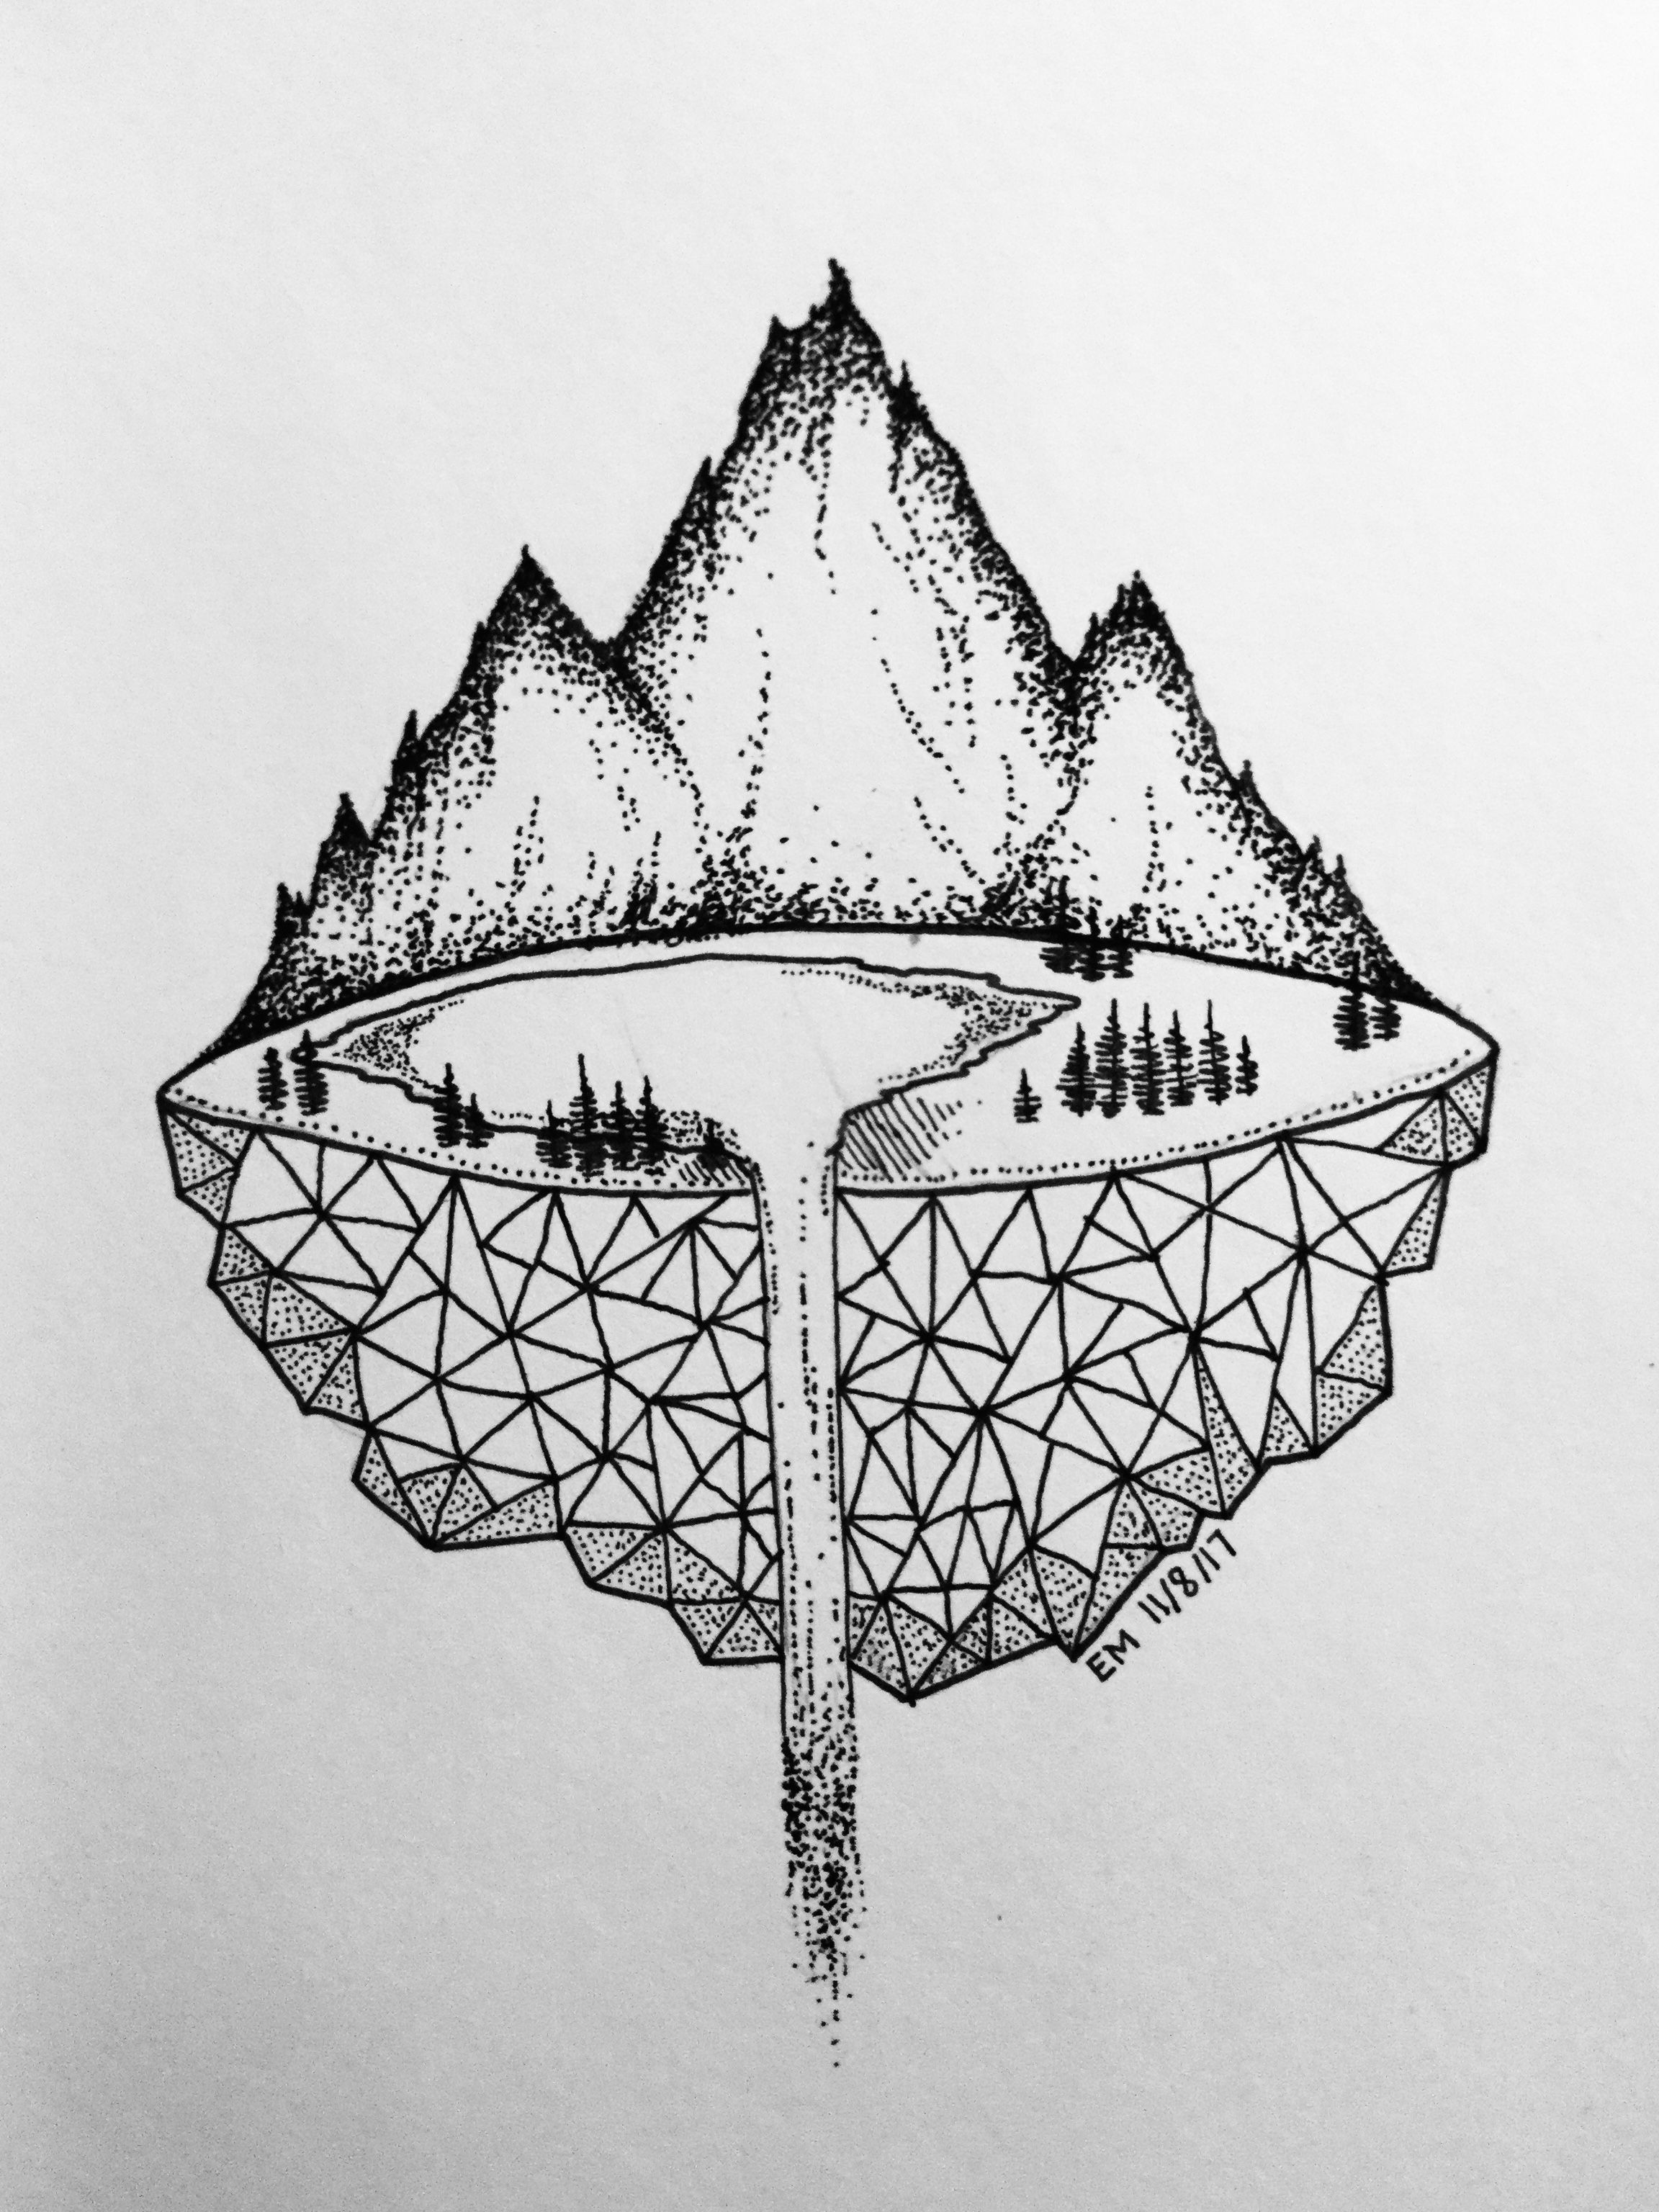 Drawing Pen Tumblr Micron Mountains A R T In 2019 Drawings Art Art Drawings